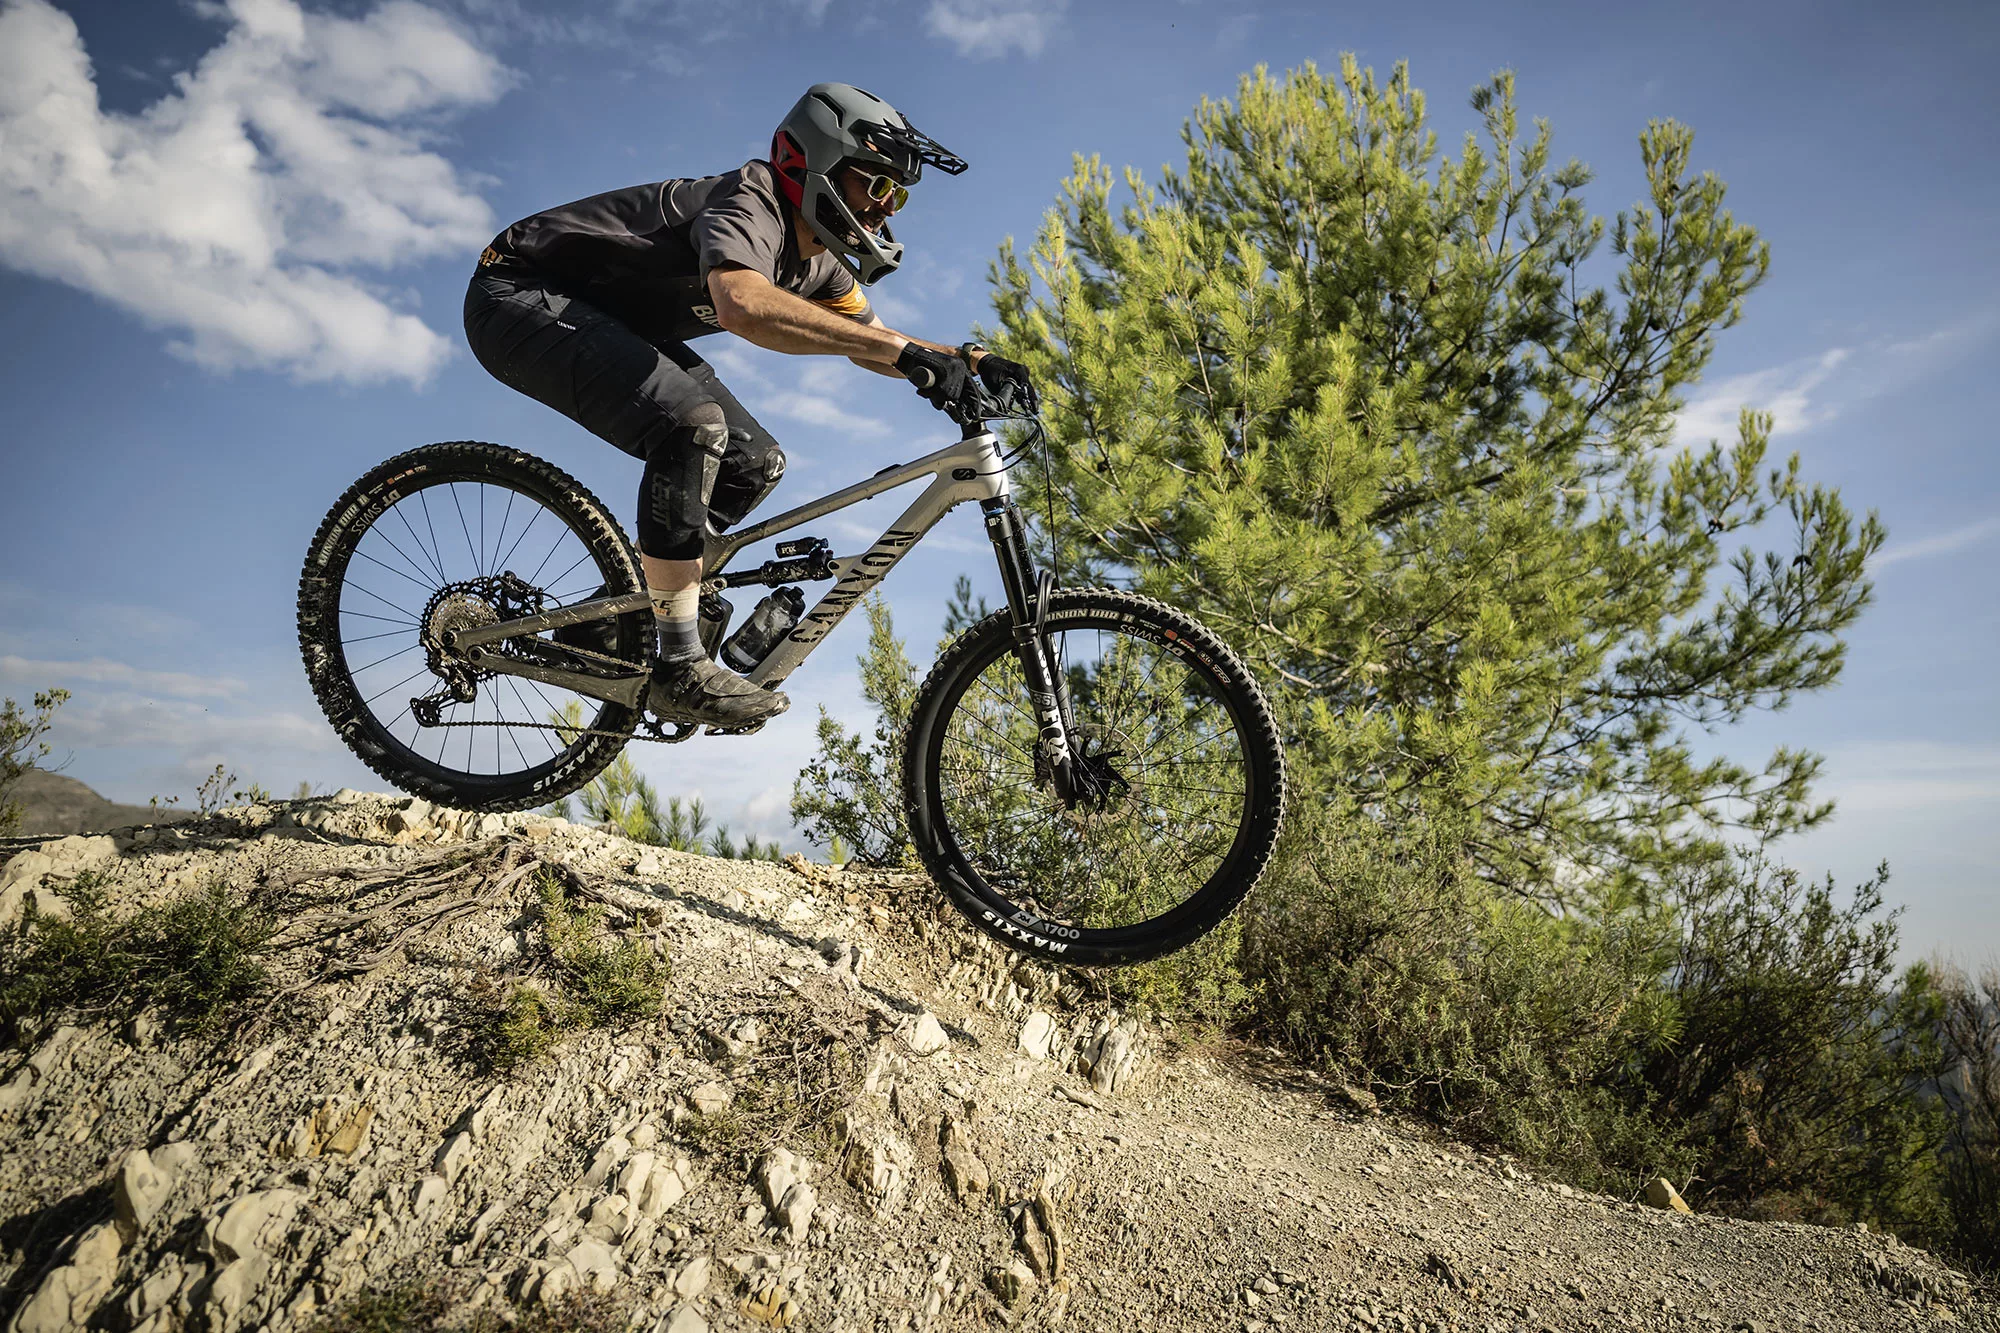 Canyon Spectral KIS MTB gets faster with stable steering - Bikerumor